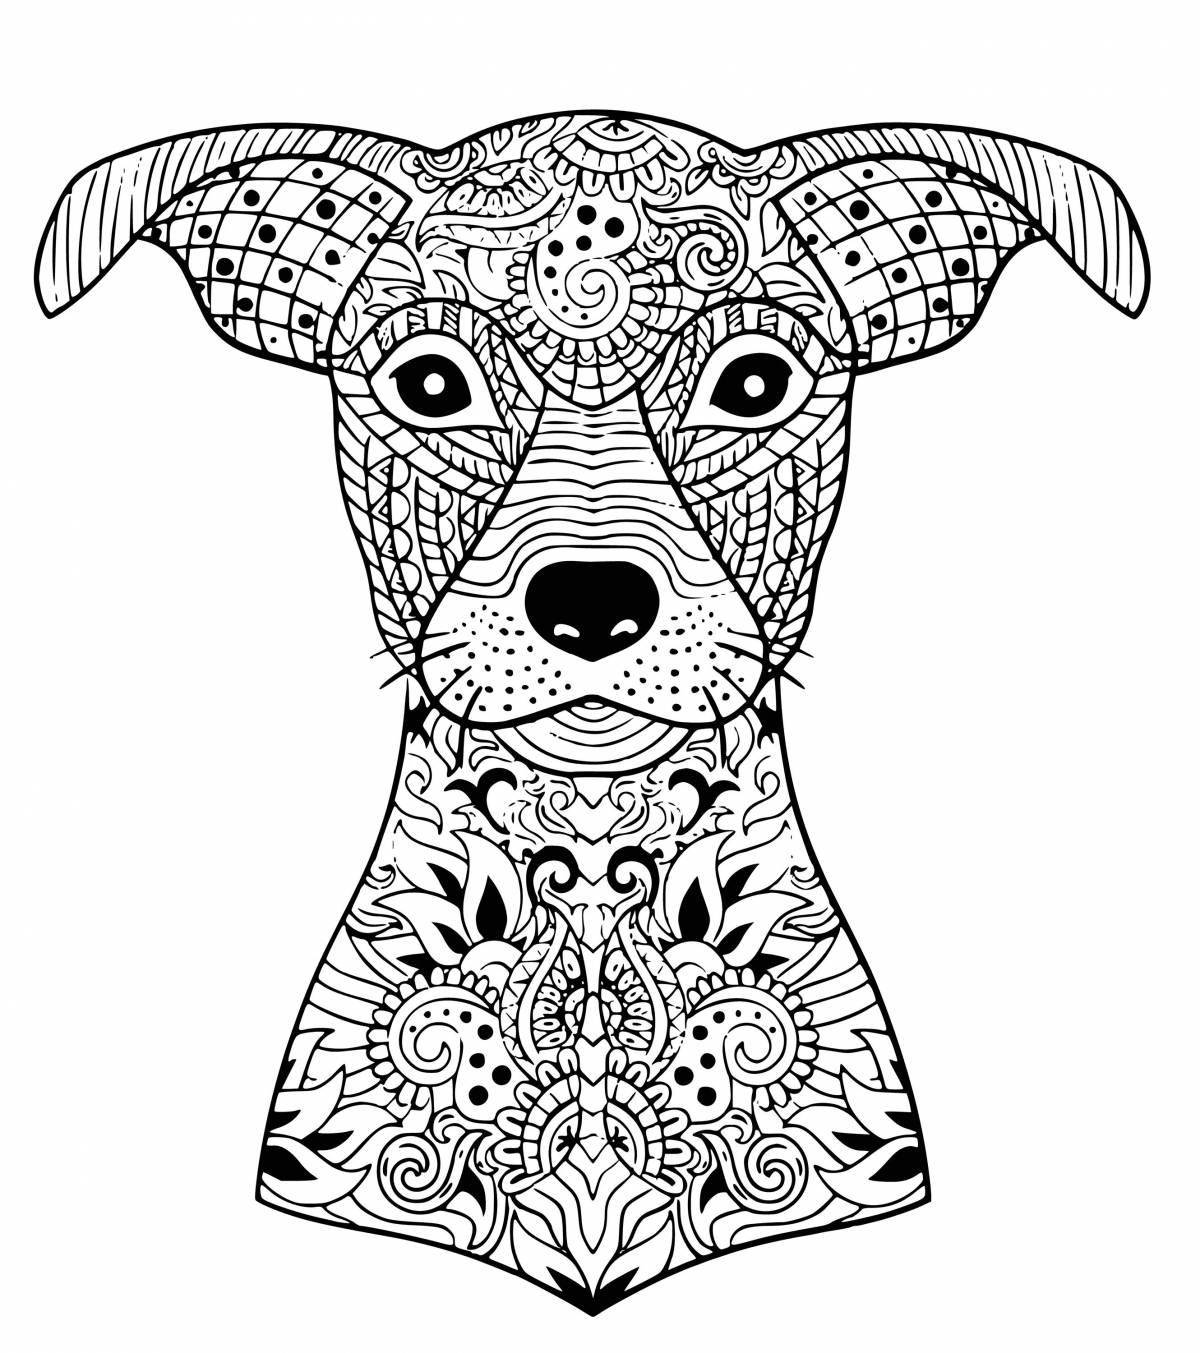 Cute dog coloring pages for adults